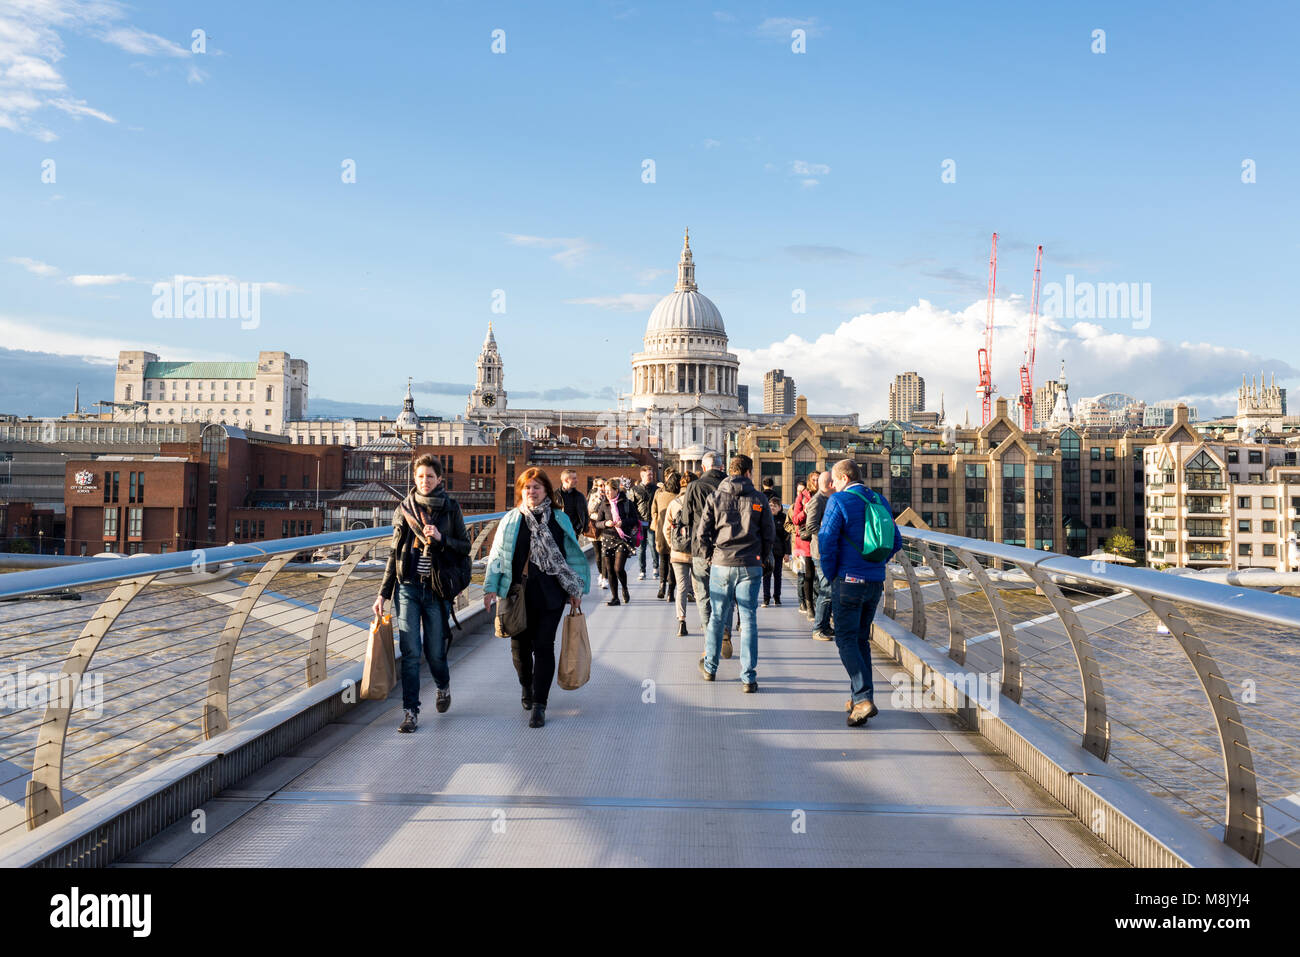 London, UK - April 2017: People walking on the Millenium bridge crossing the river Thames with view of St Paul's Cathedral on a sunny day Stock Photo